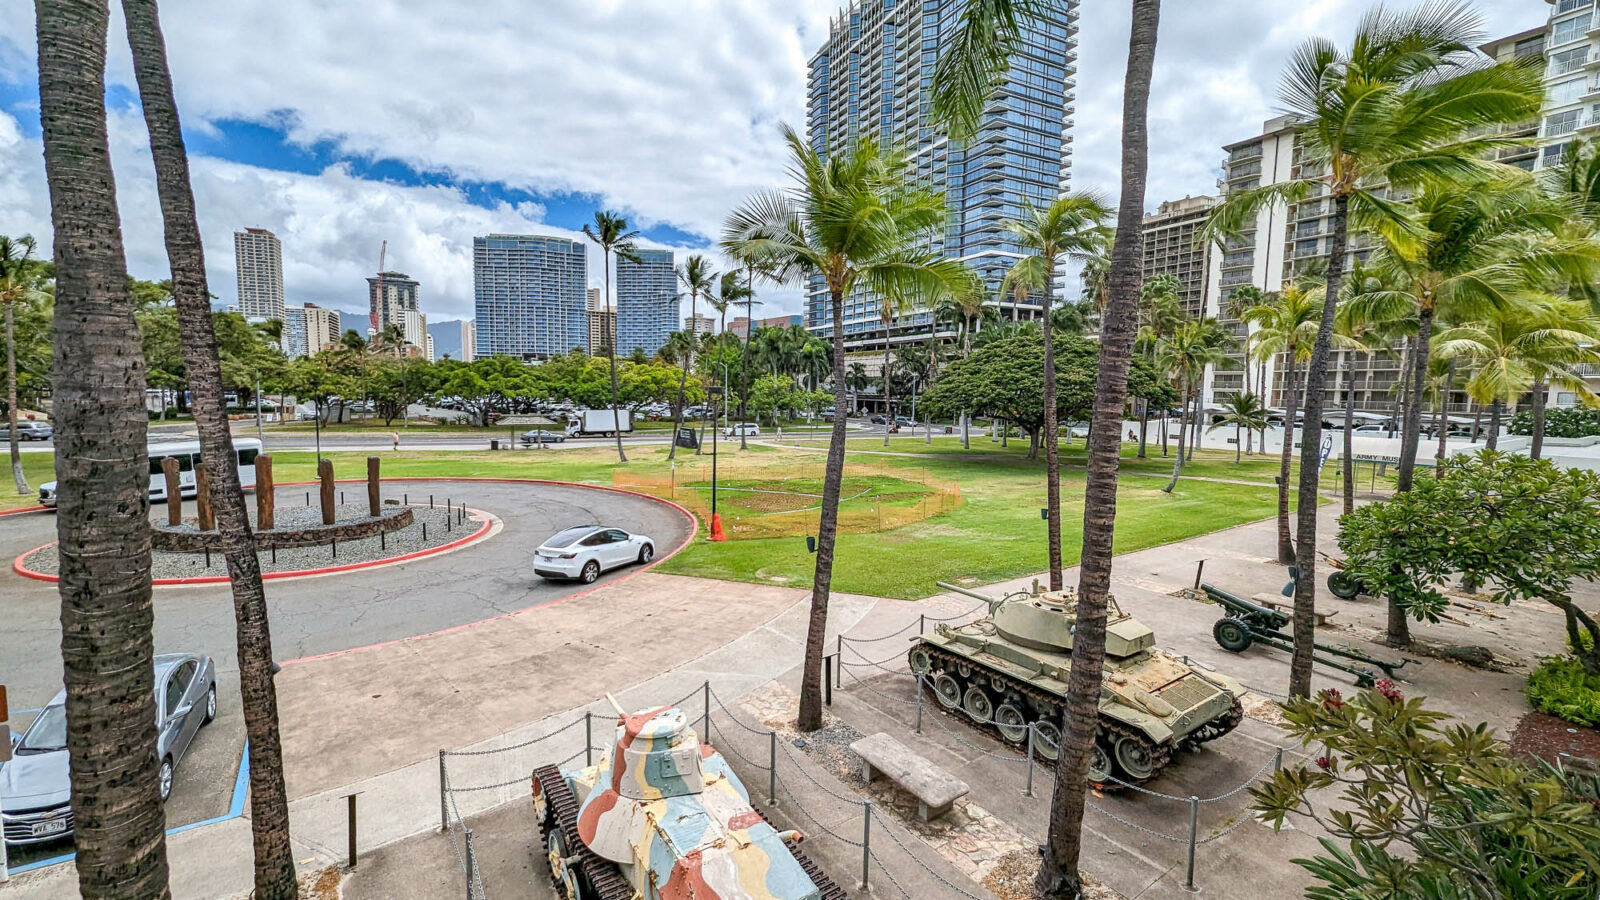 camouflage wwii tanks sitting under palm trees outside a museum